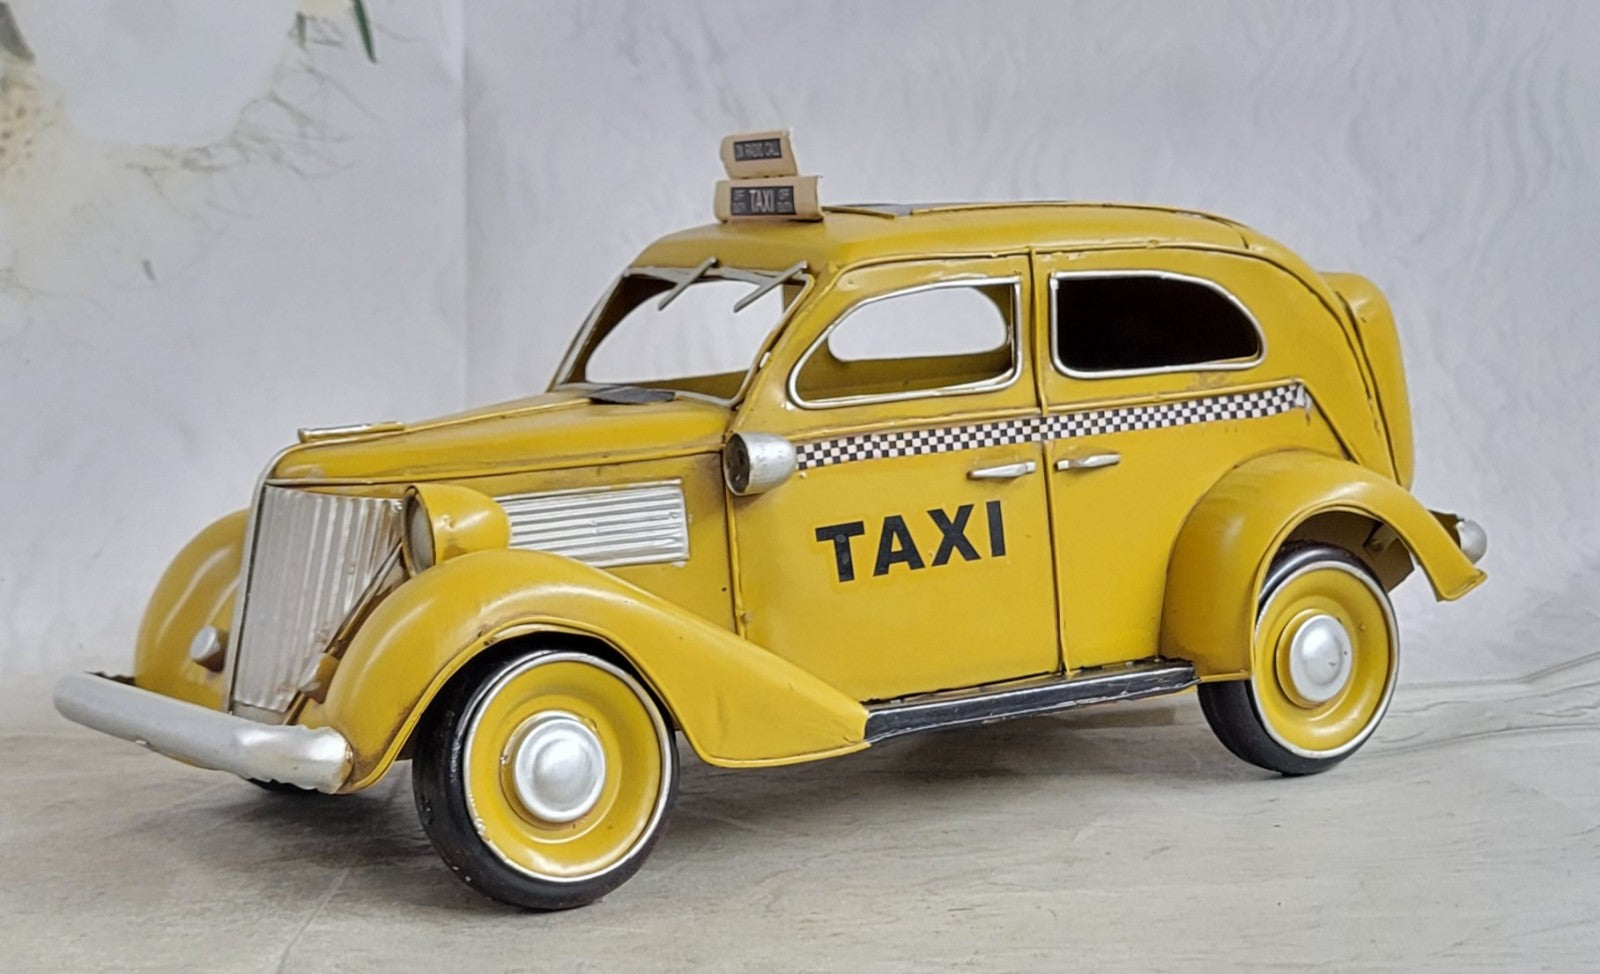 Jayland Checker New York Taxi (Yellow Cab) 1930 Styles Metal Masterpiece